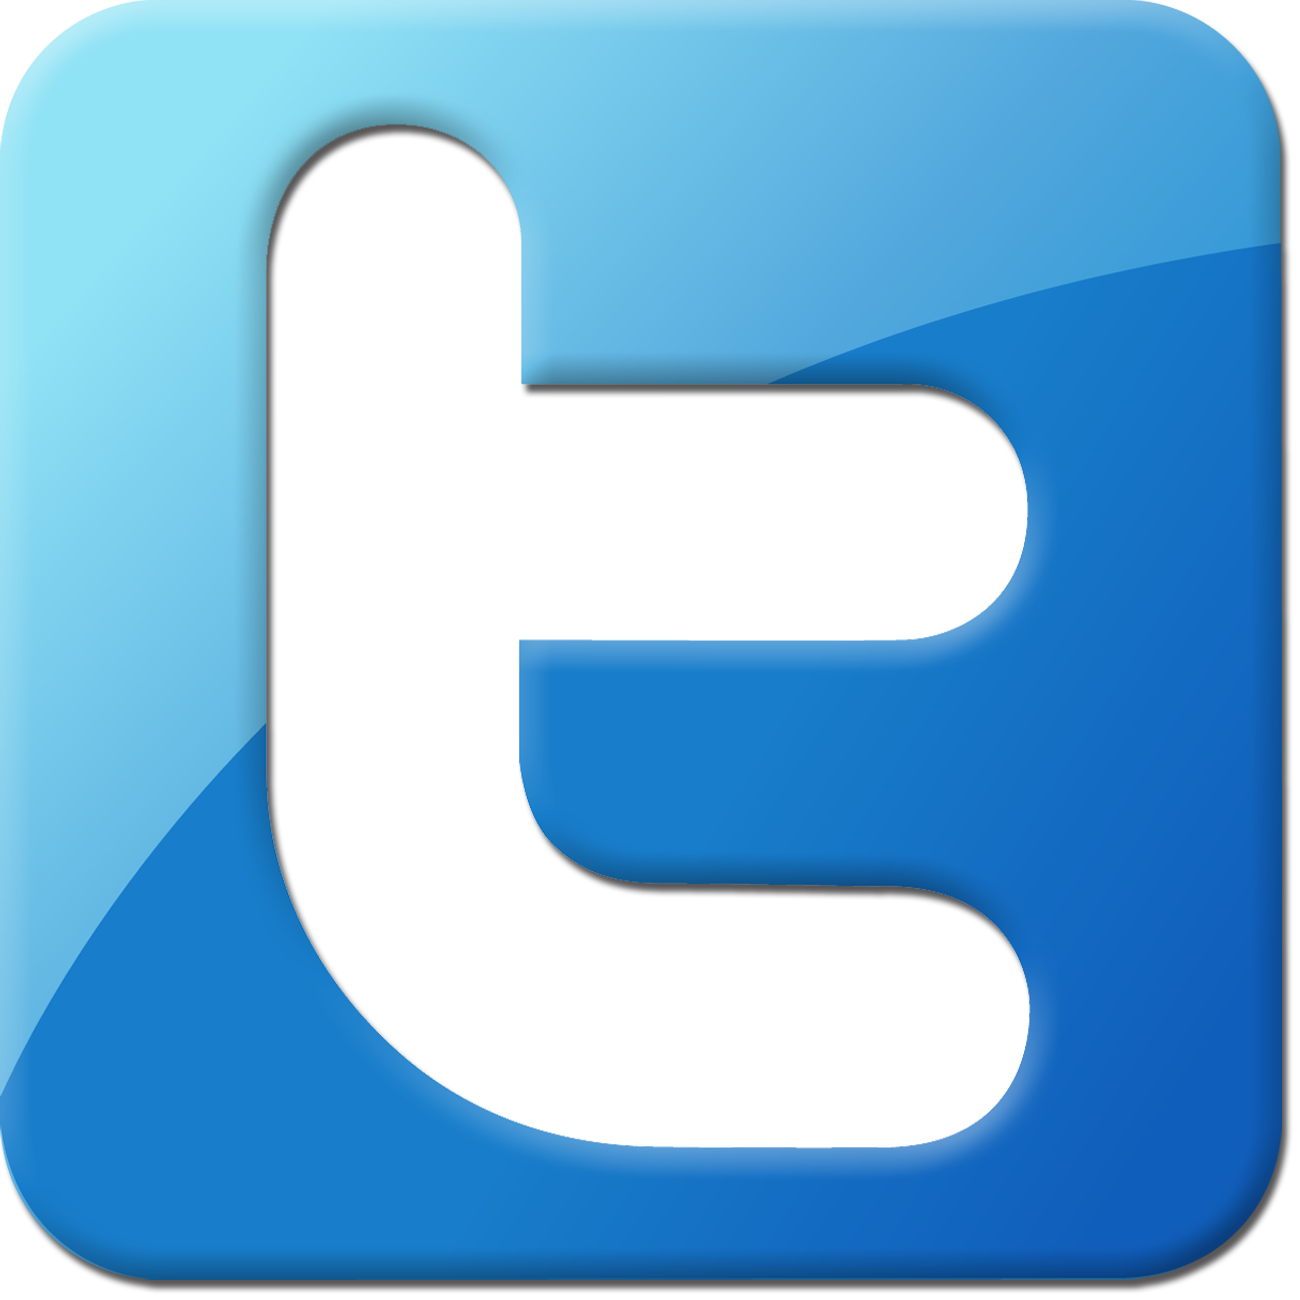 Twitter Logo Vector Png - Cli